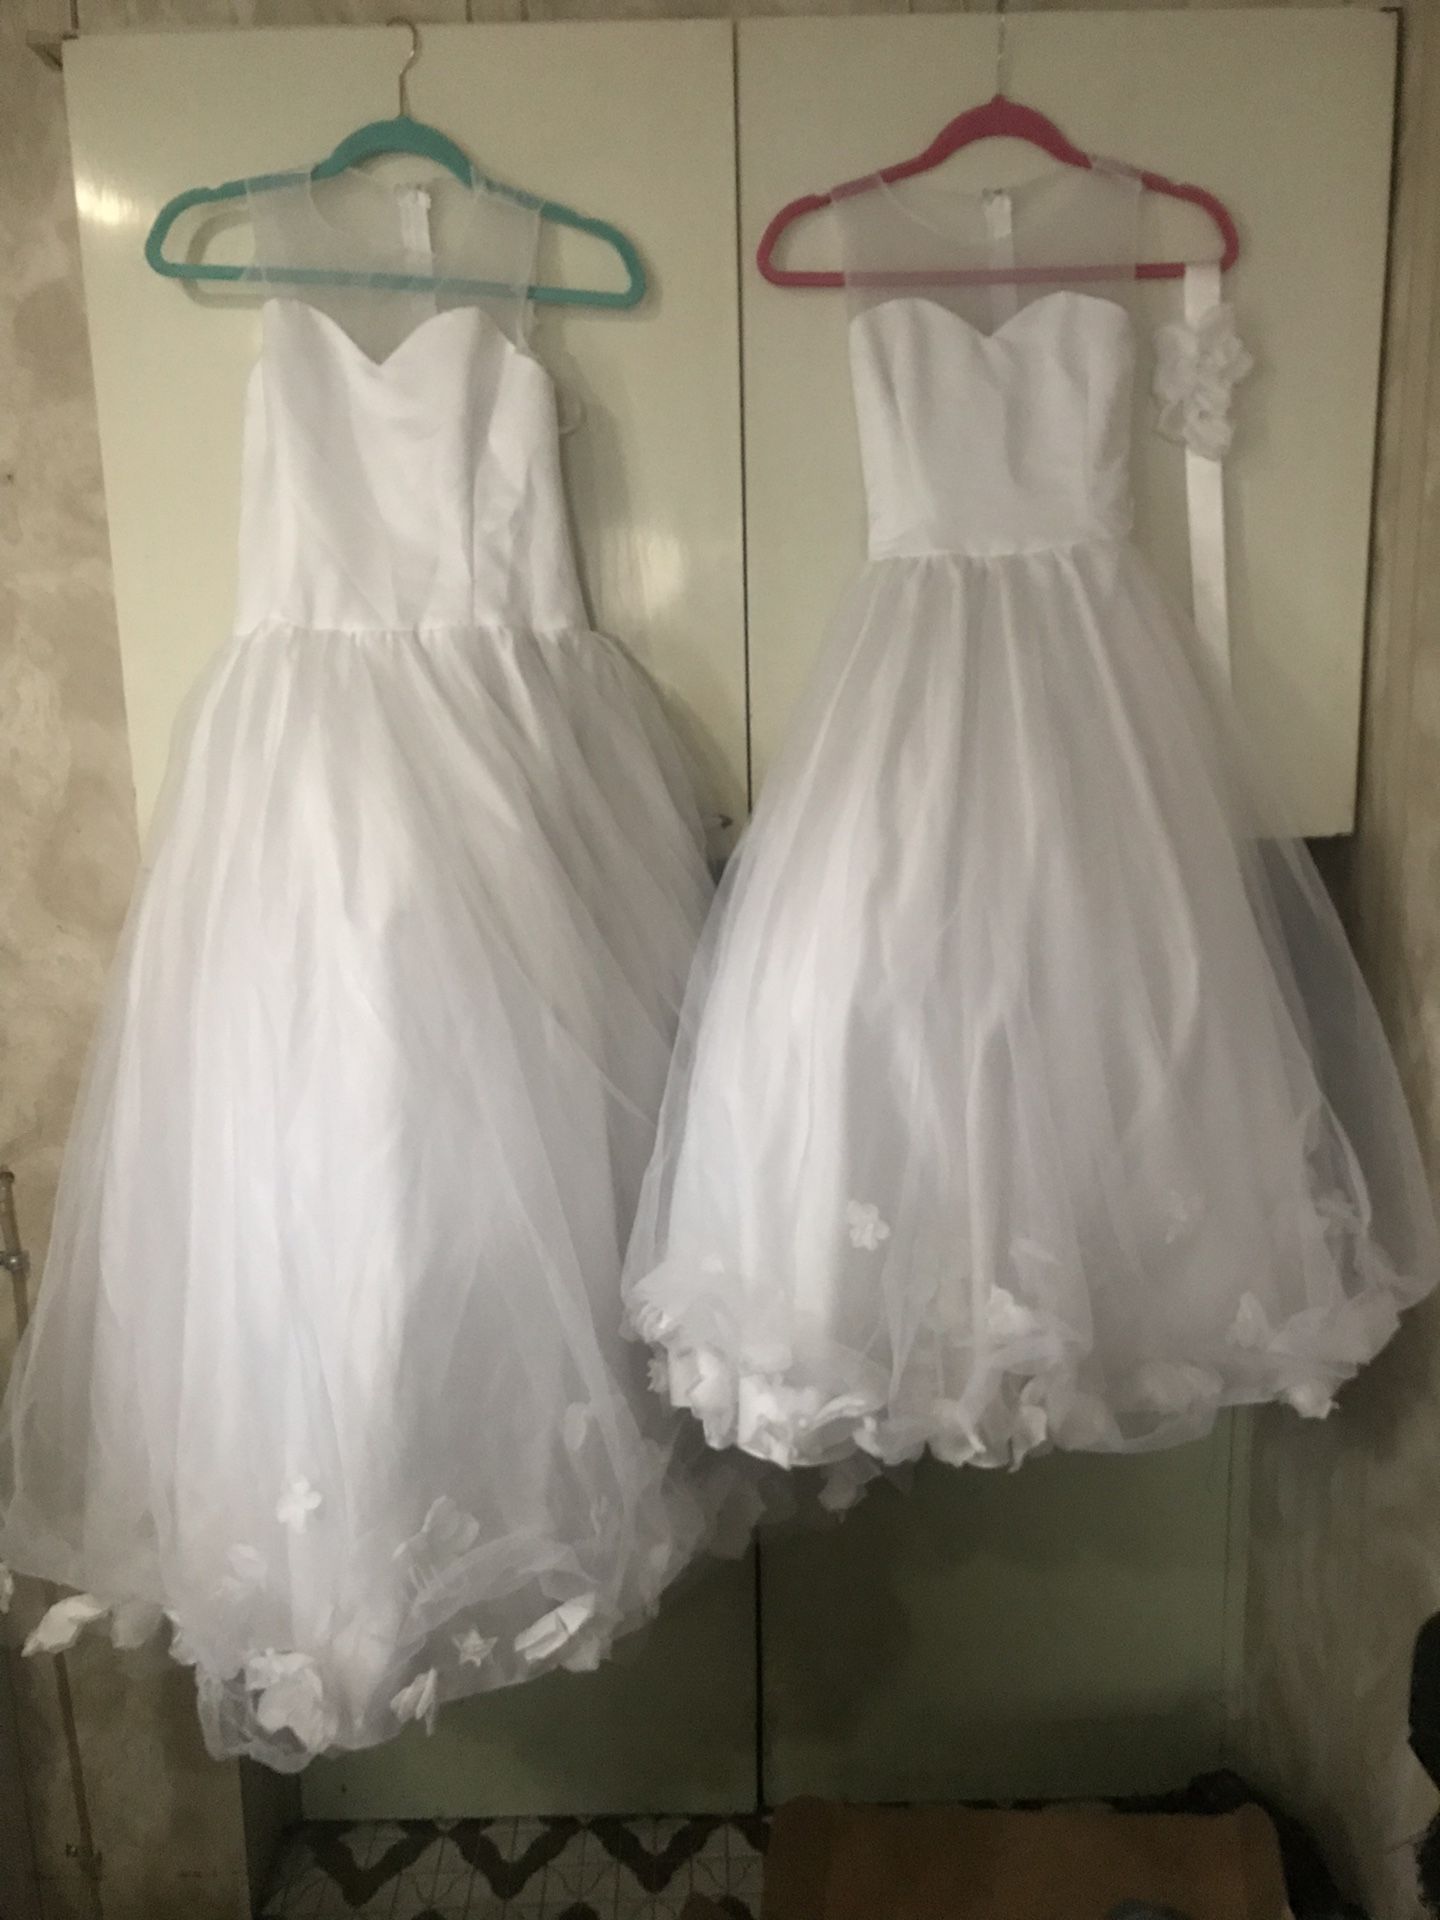 2 Flower girl dresses used once size 7/8 and 10/12.